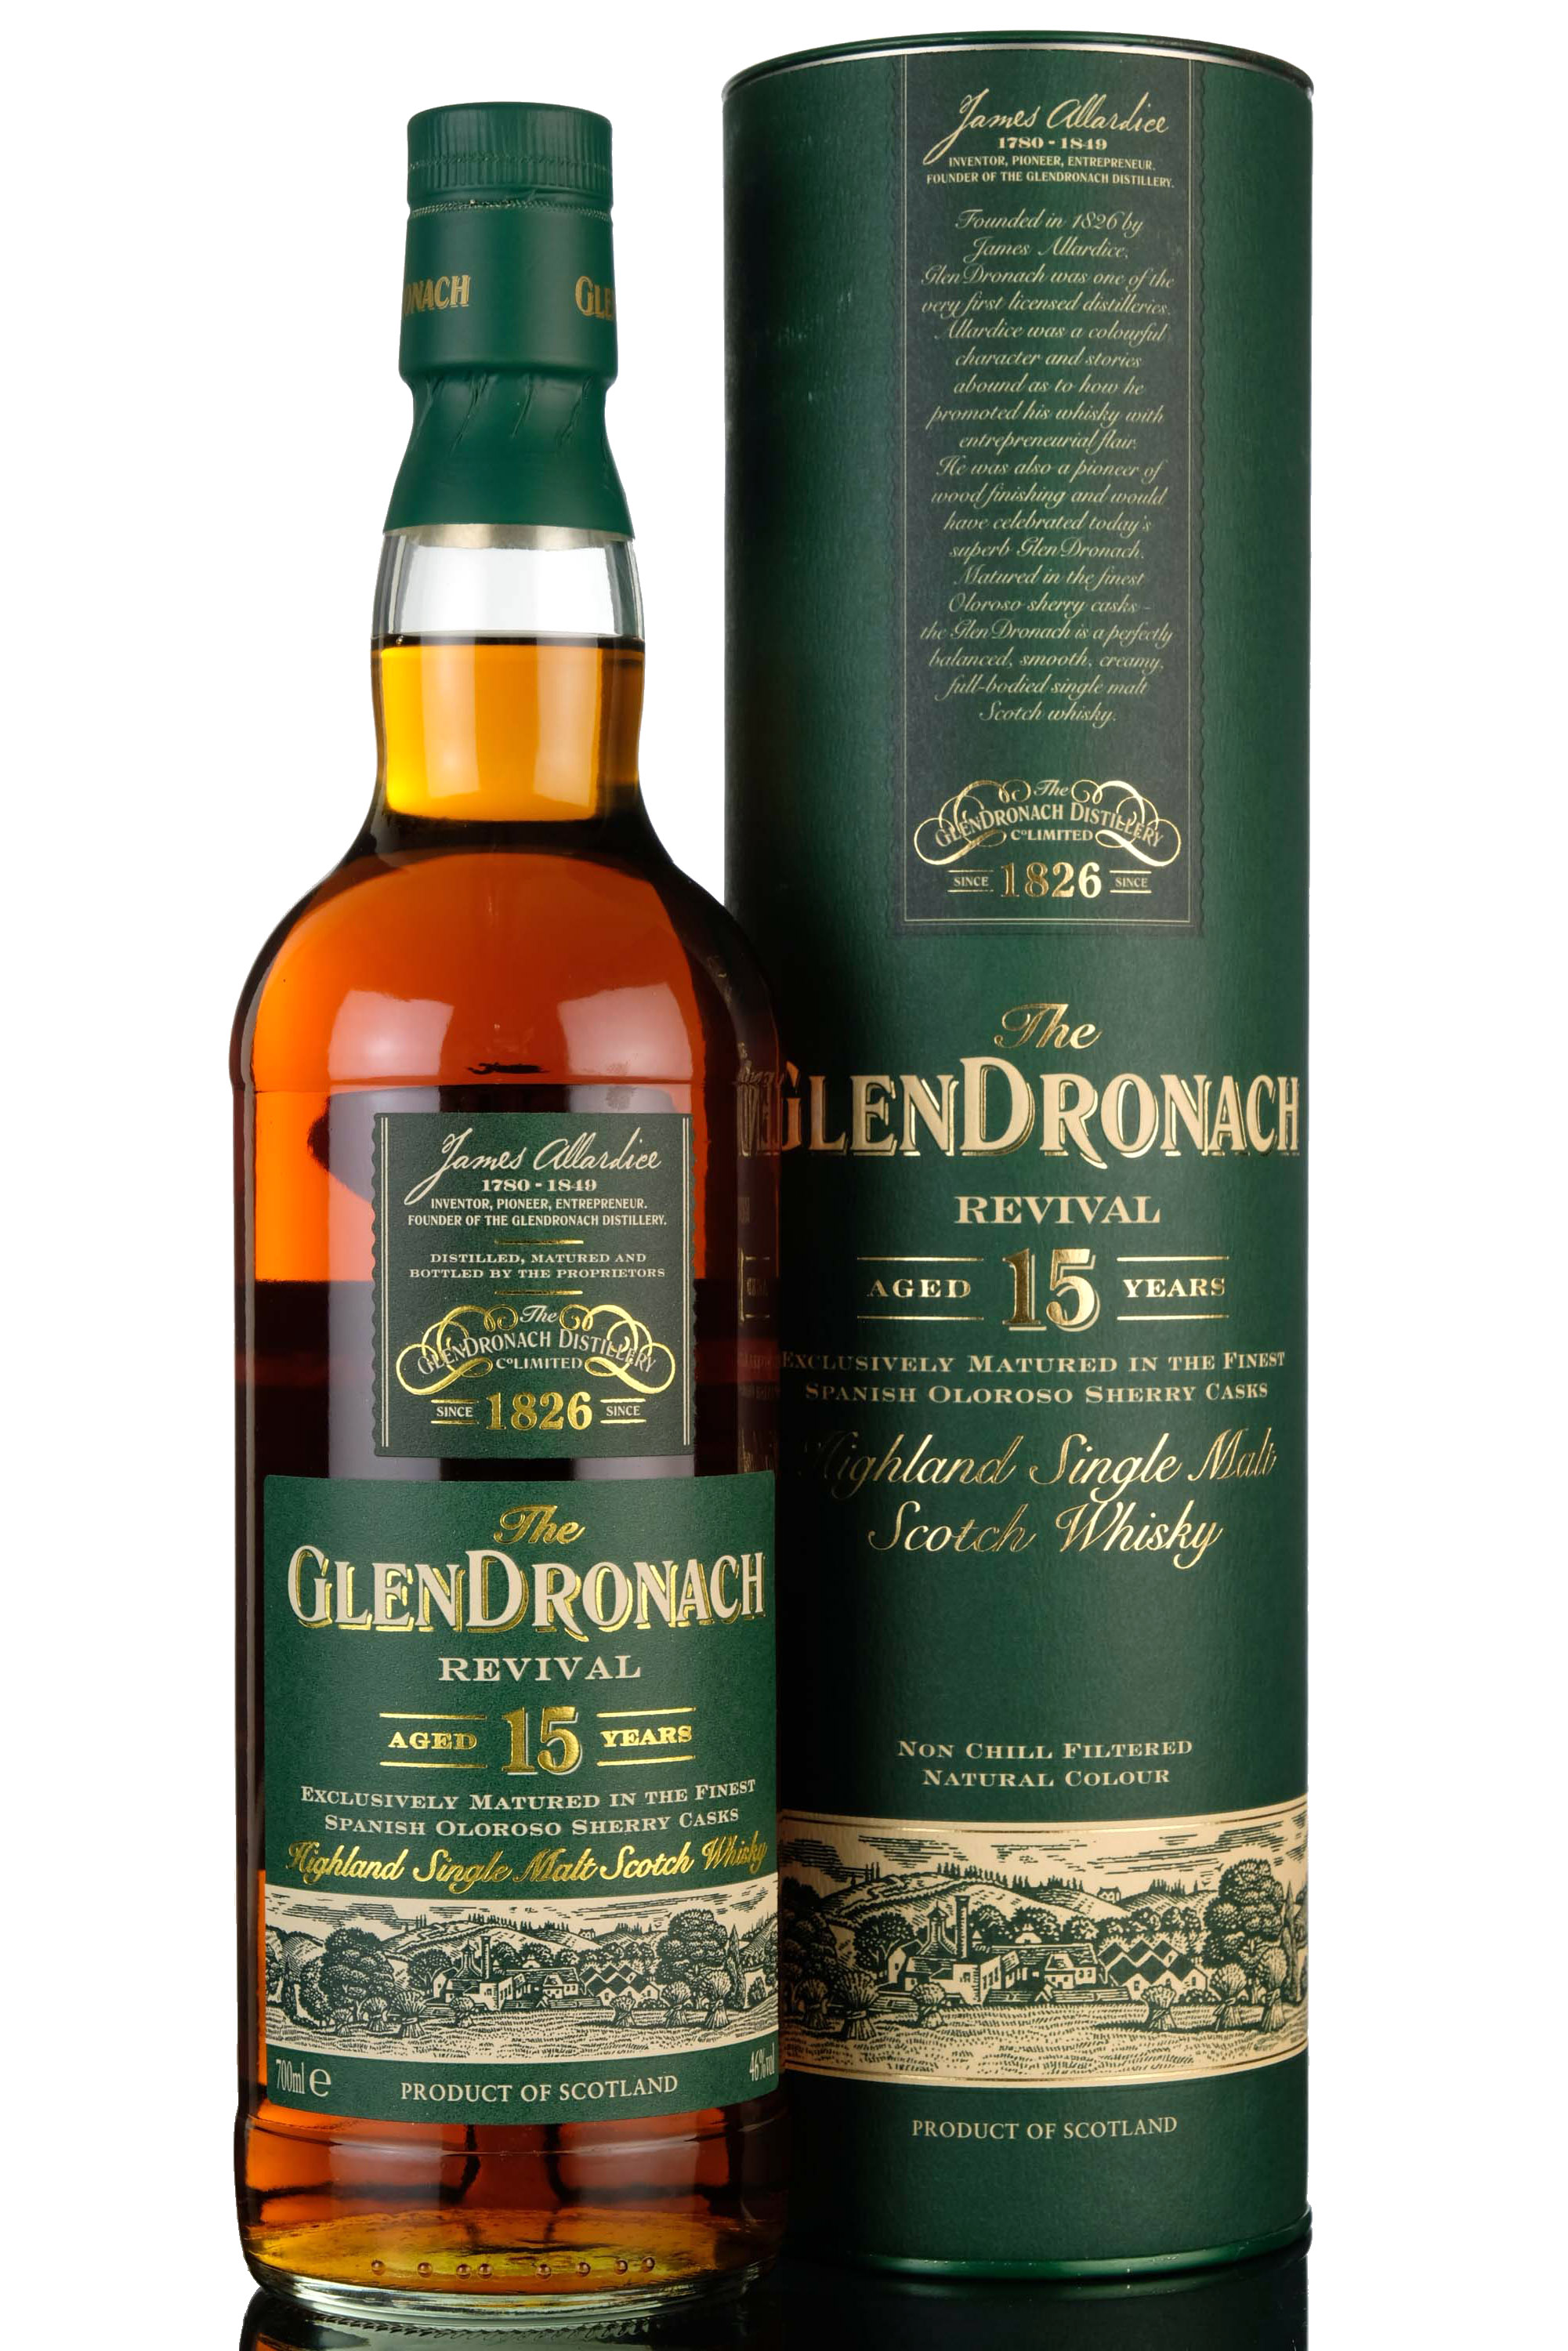 Glendronach 15 Year Old - Revival - 2009 Release